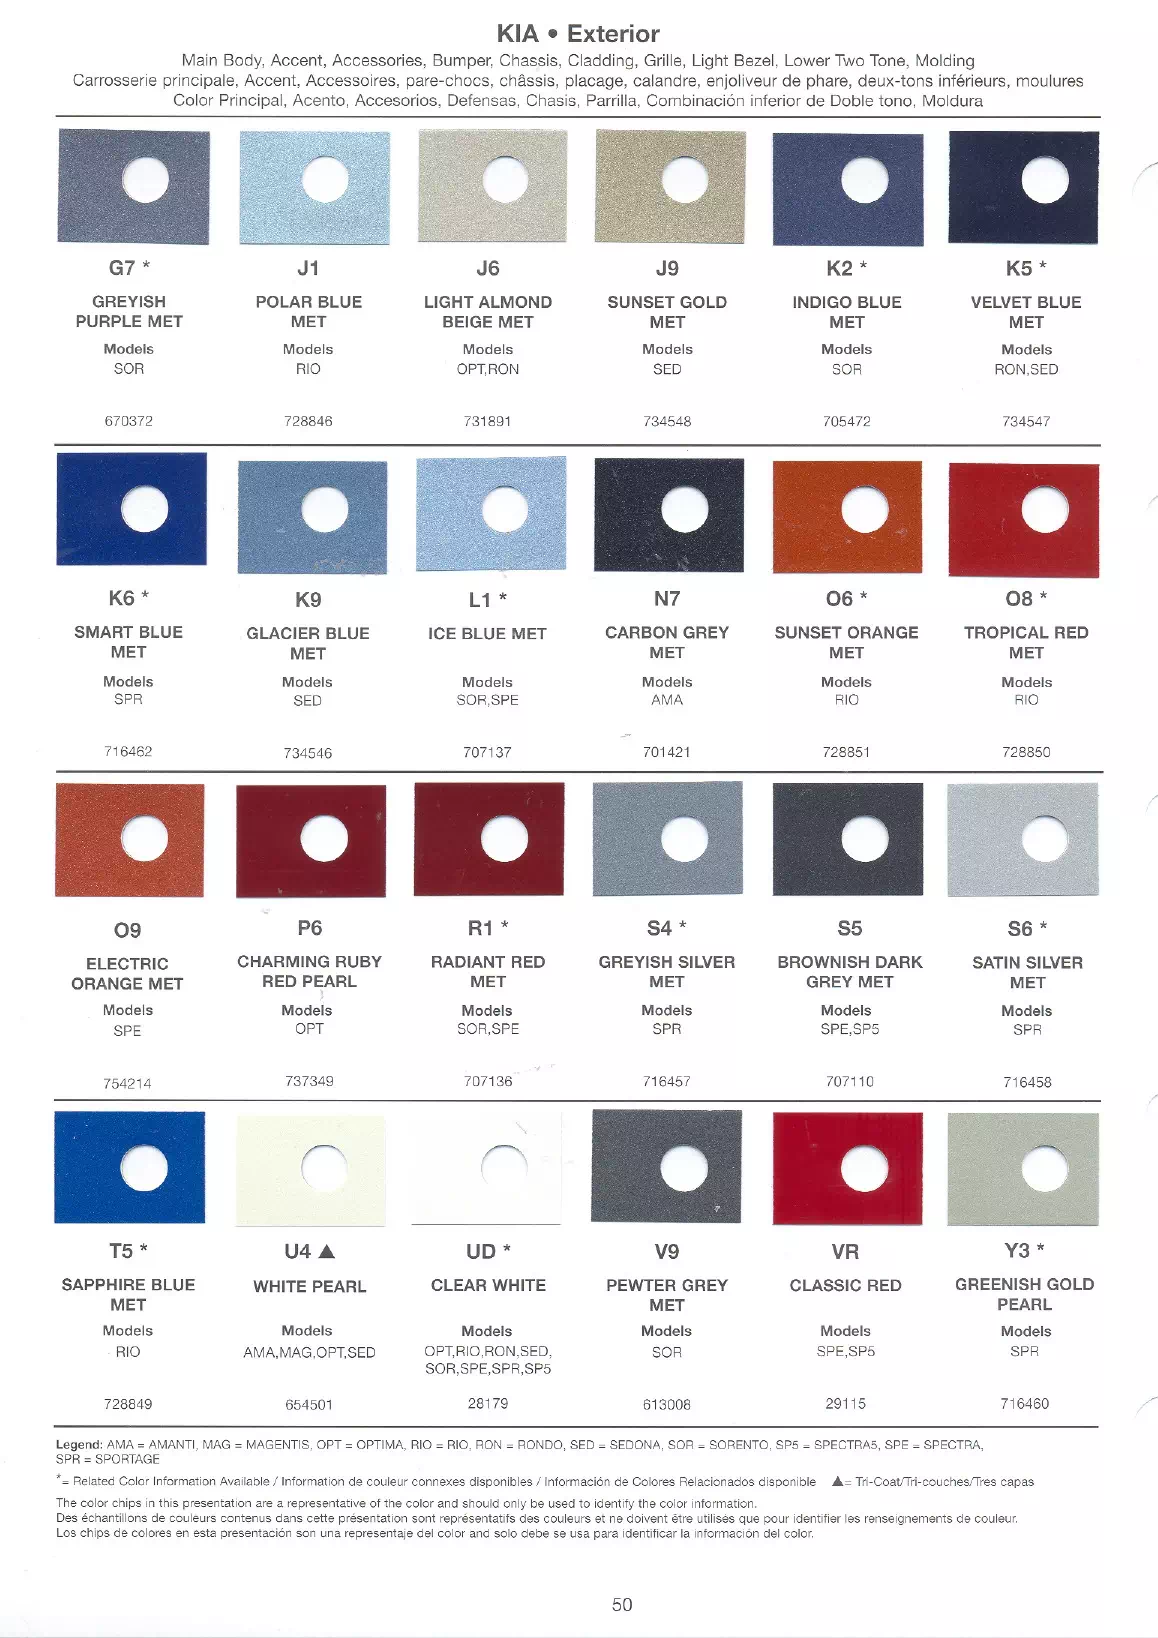 Exterior Paint Colors for Kia Vehicles in 2006